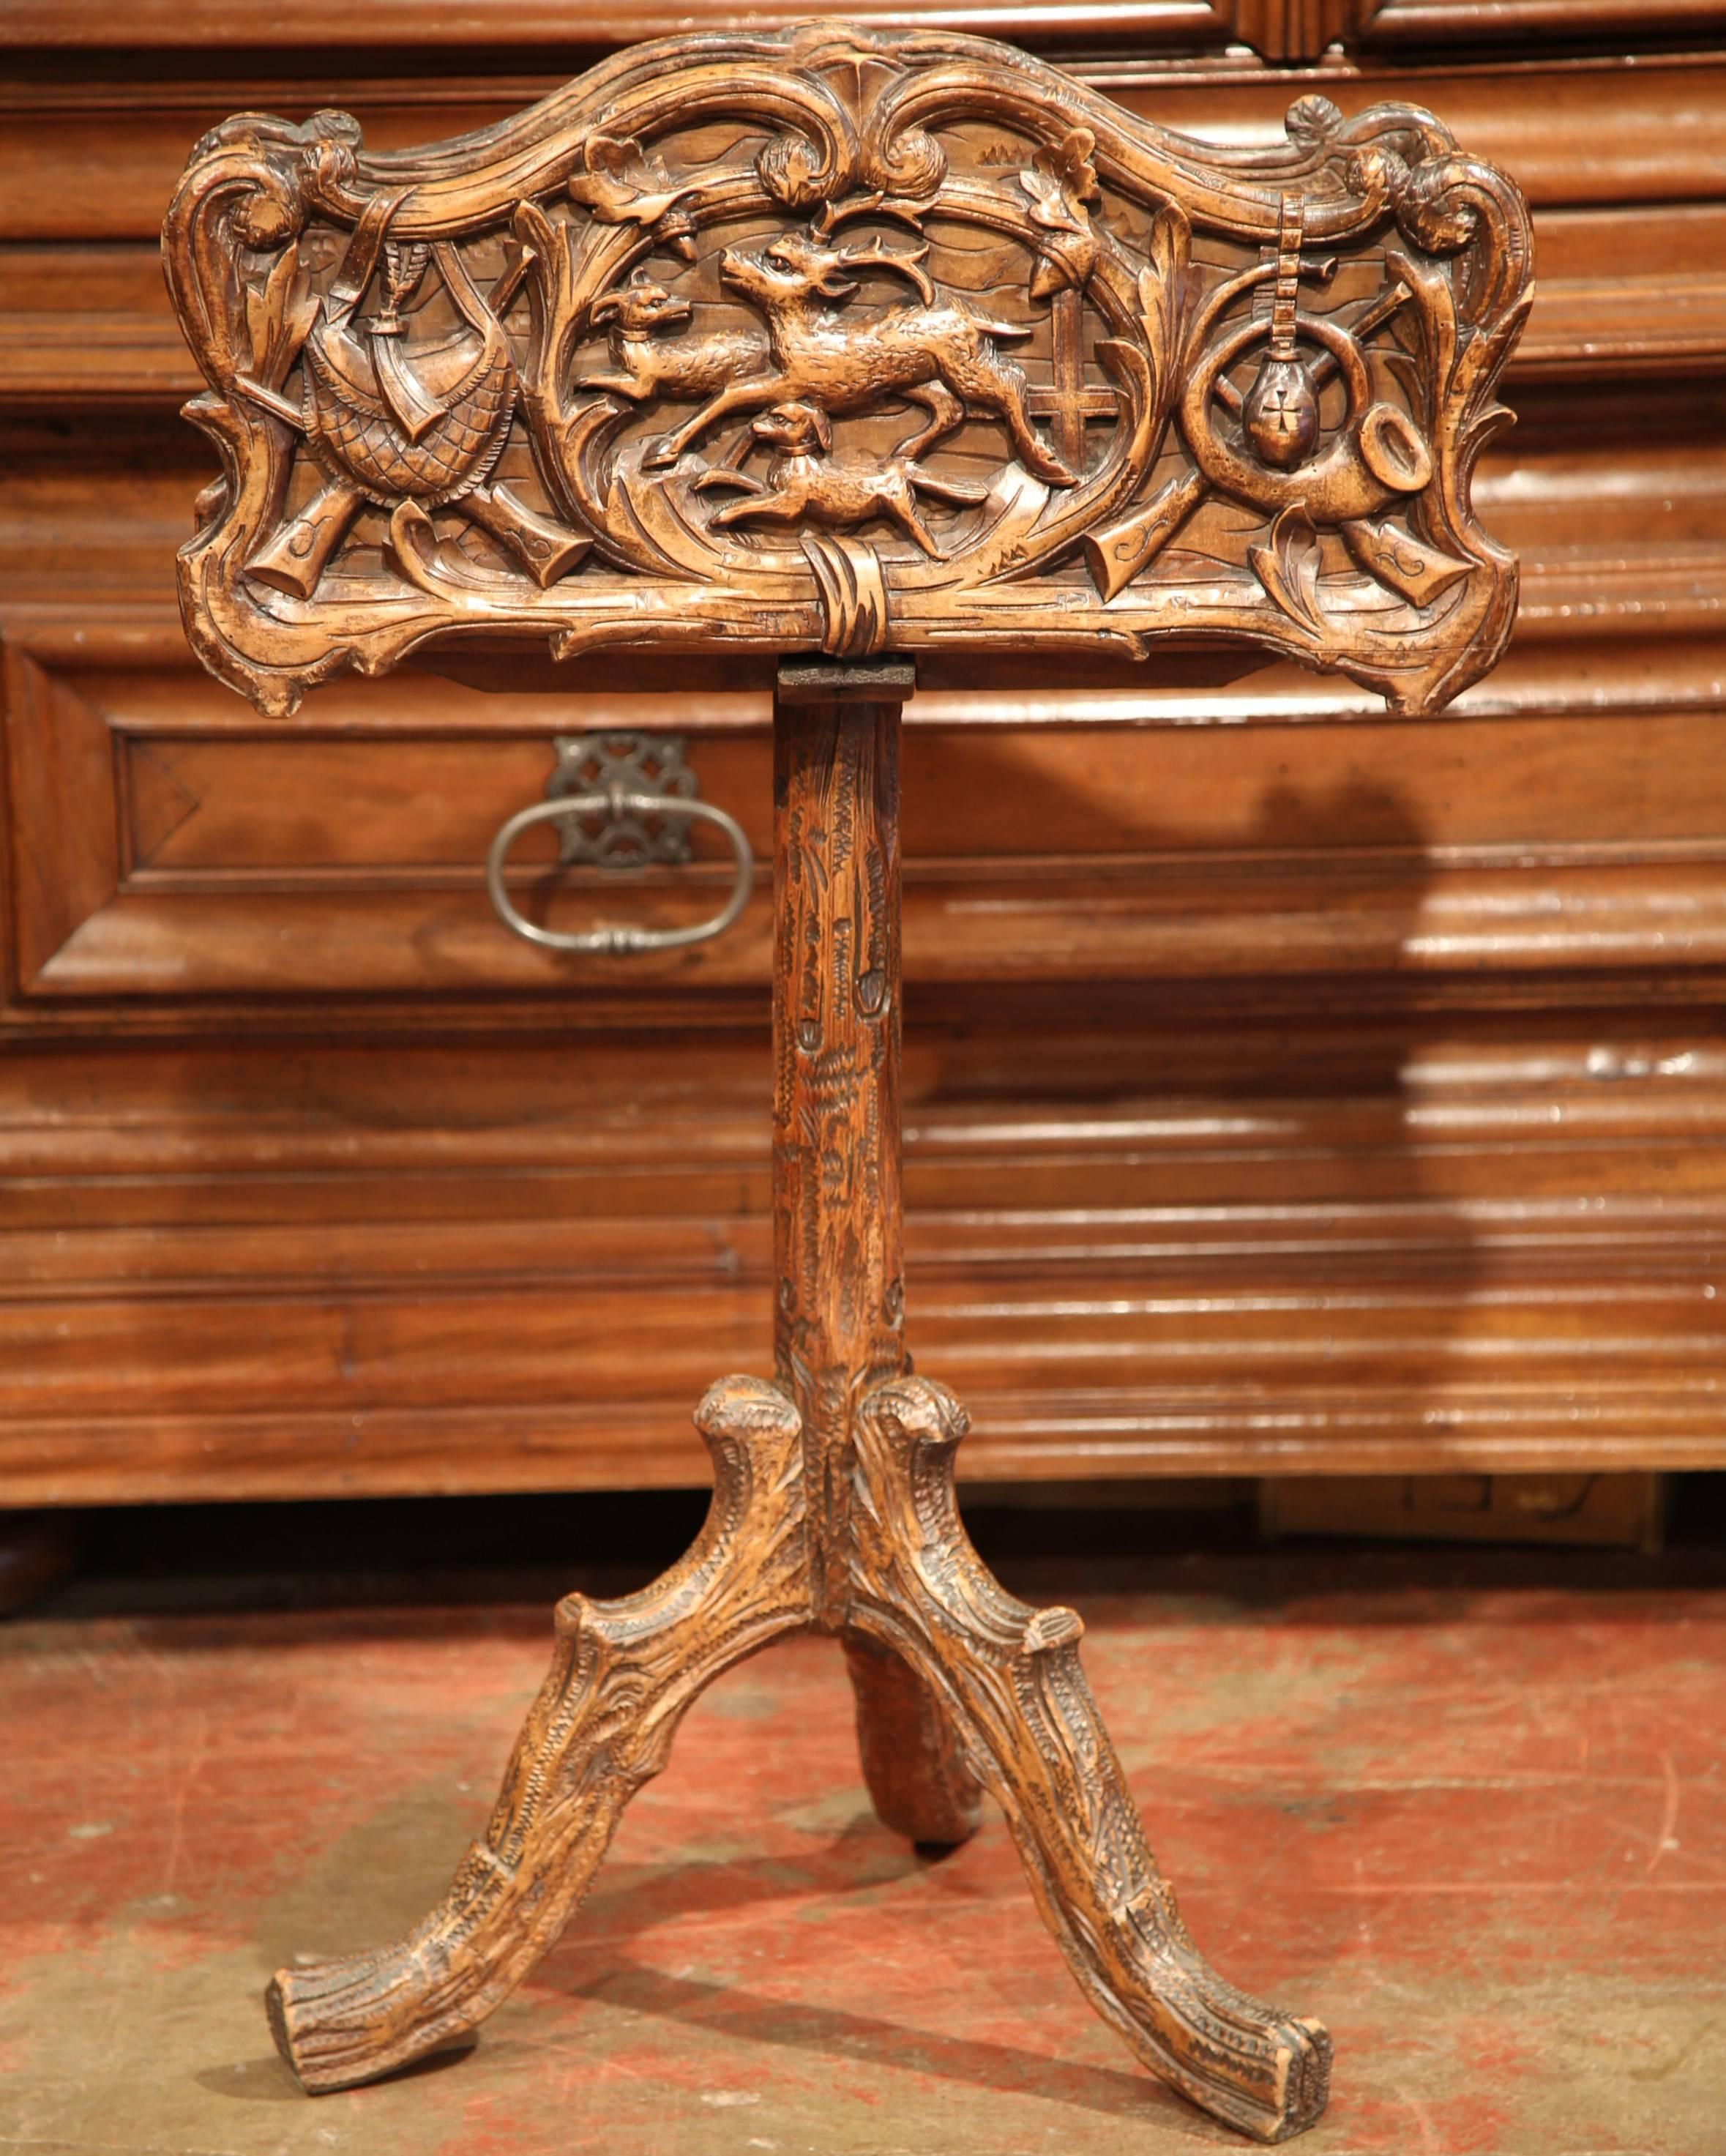 This beautiful, walnut Black Forest jardiniere was carved in France, circa 1880. The elevated planter features a hunting scene, a running deer with two dogs in the centre medallion, flanked by hunting attributes on both sides: a pair of guns with a